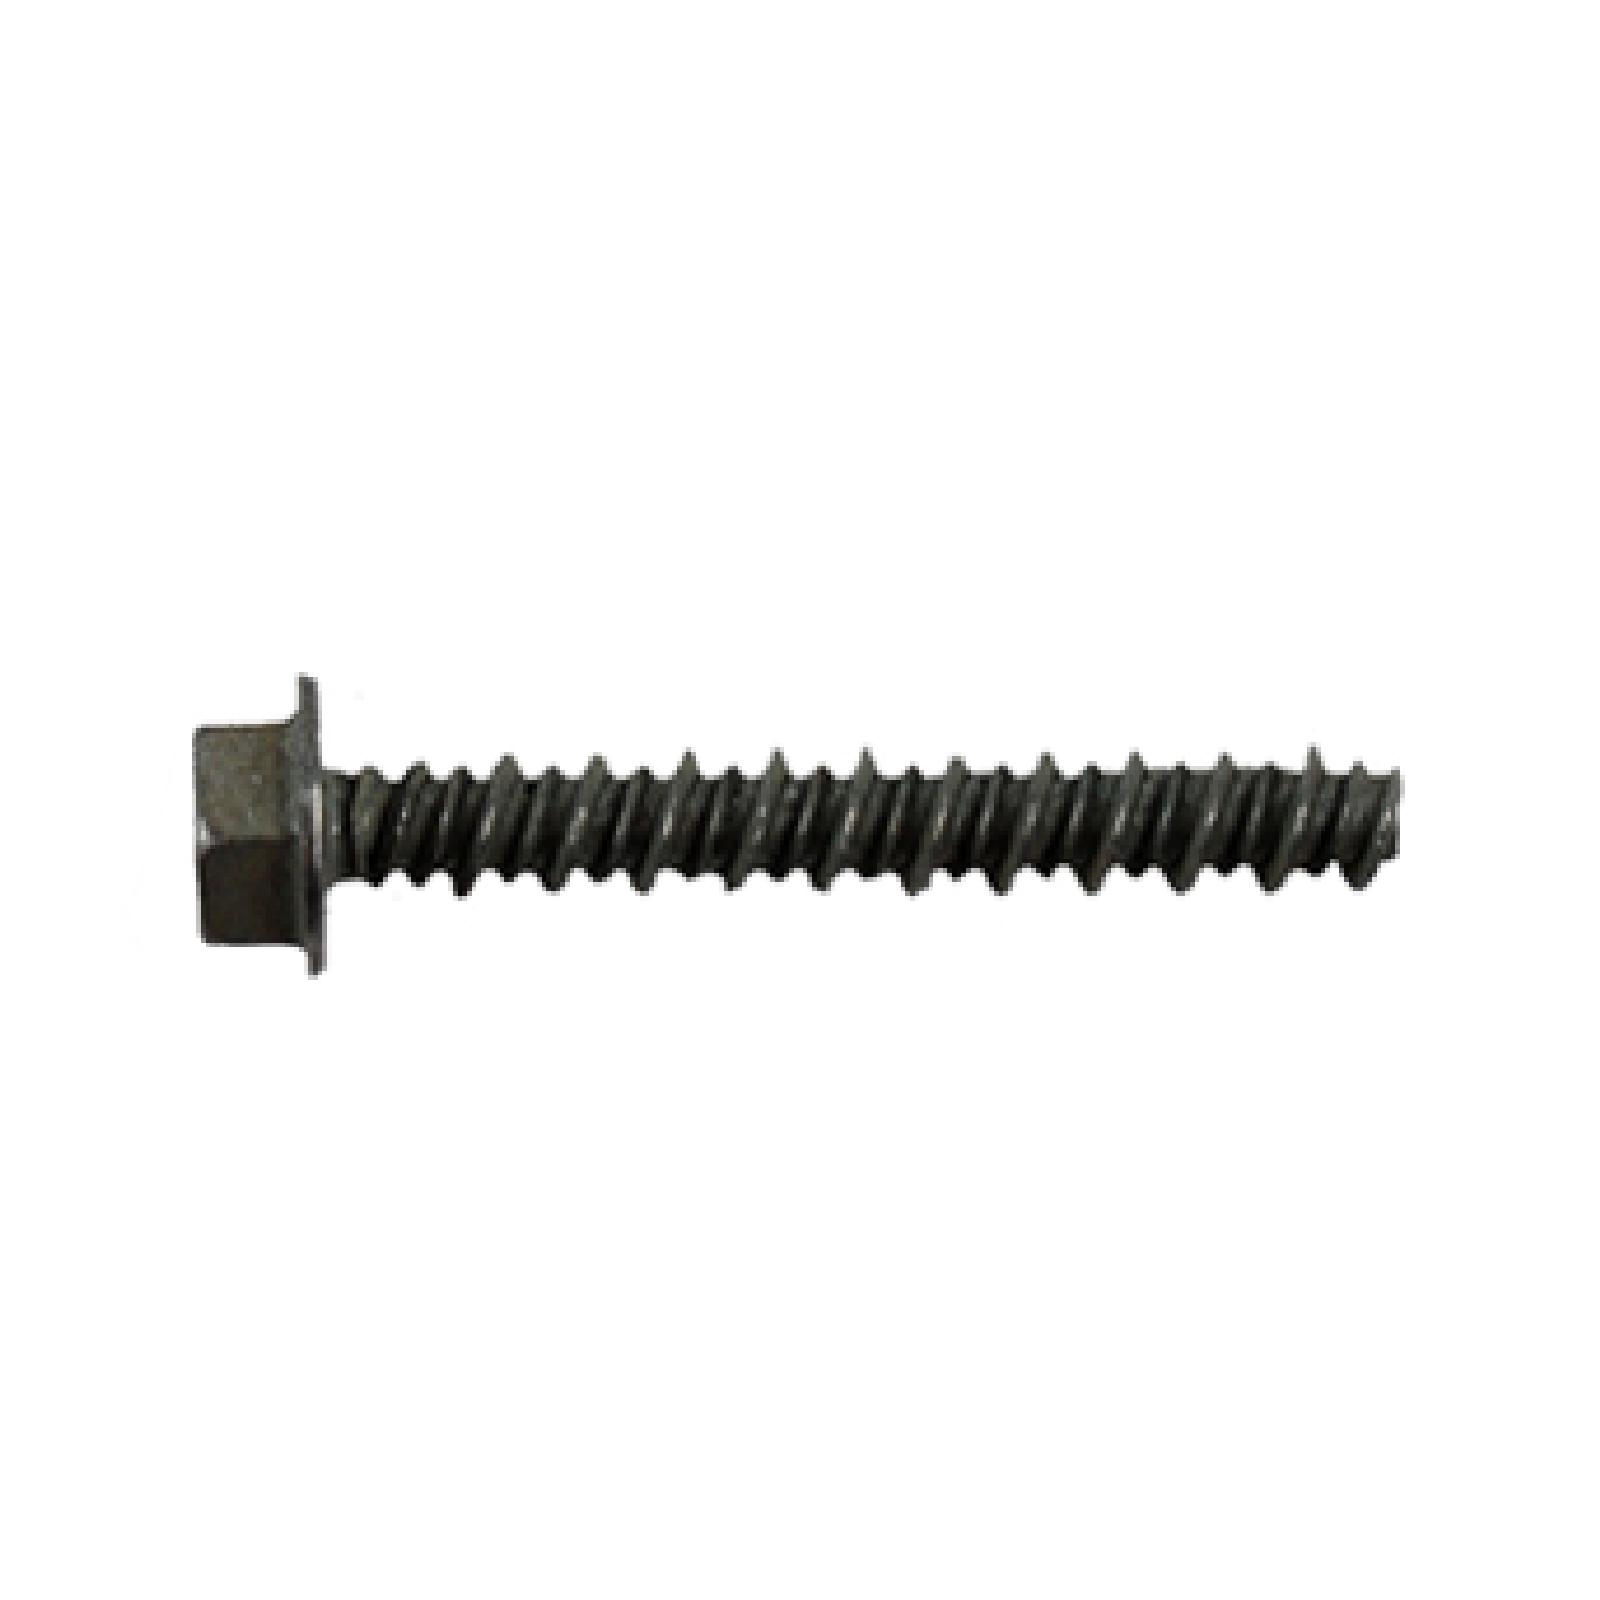 SCREW TRUSS MACH part# 710-0796 by MTD - Click Image to Close